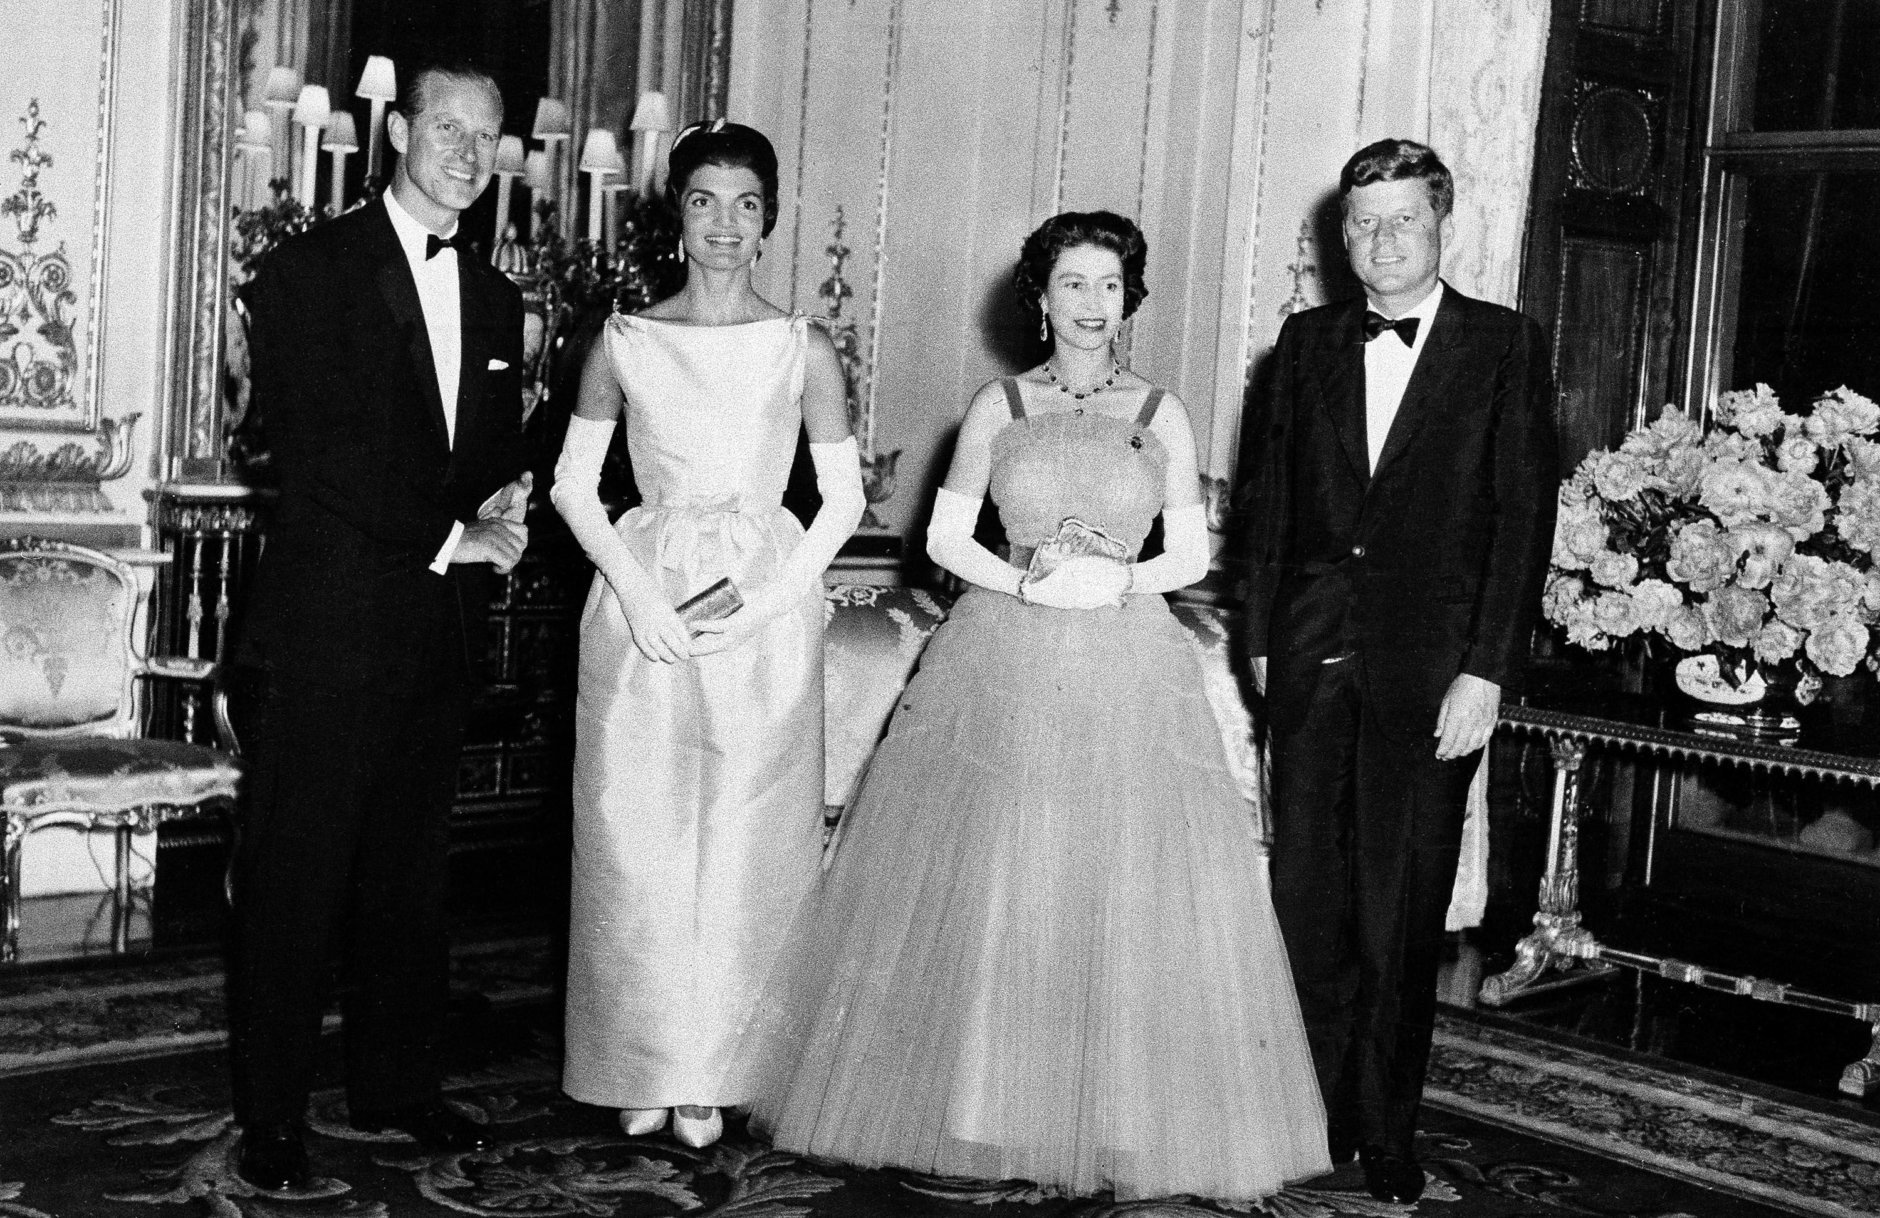 Queen Elizabeth II poses with President John Kennedy, first lady Jacqueline Kennedy, and Prince Philip, June 5, 1961, at Buckingham Palace in London.  The Kennedys were guests of the Queen at dinner.  (AP Photo)